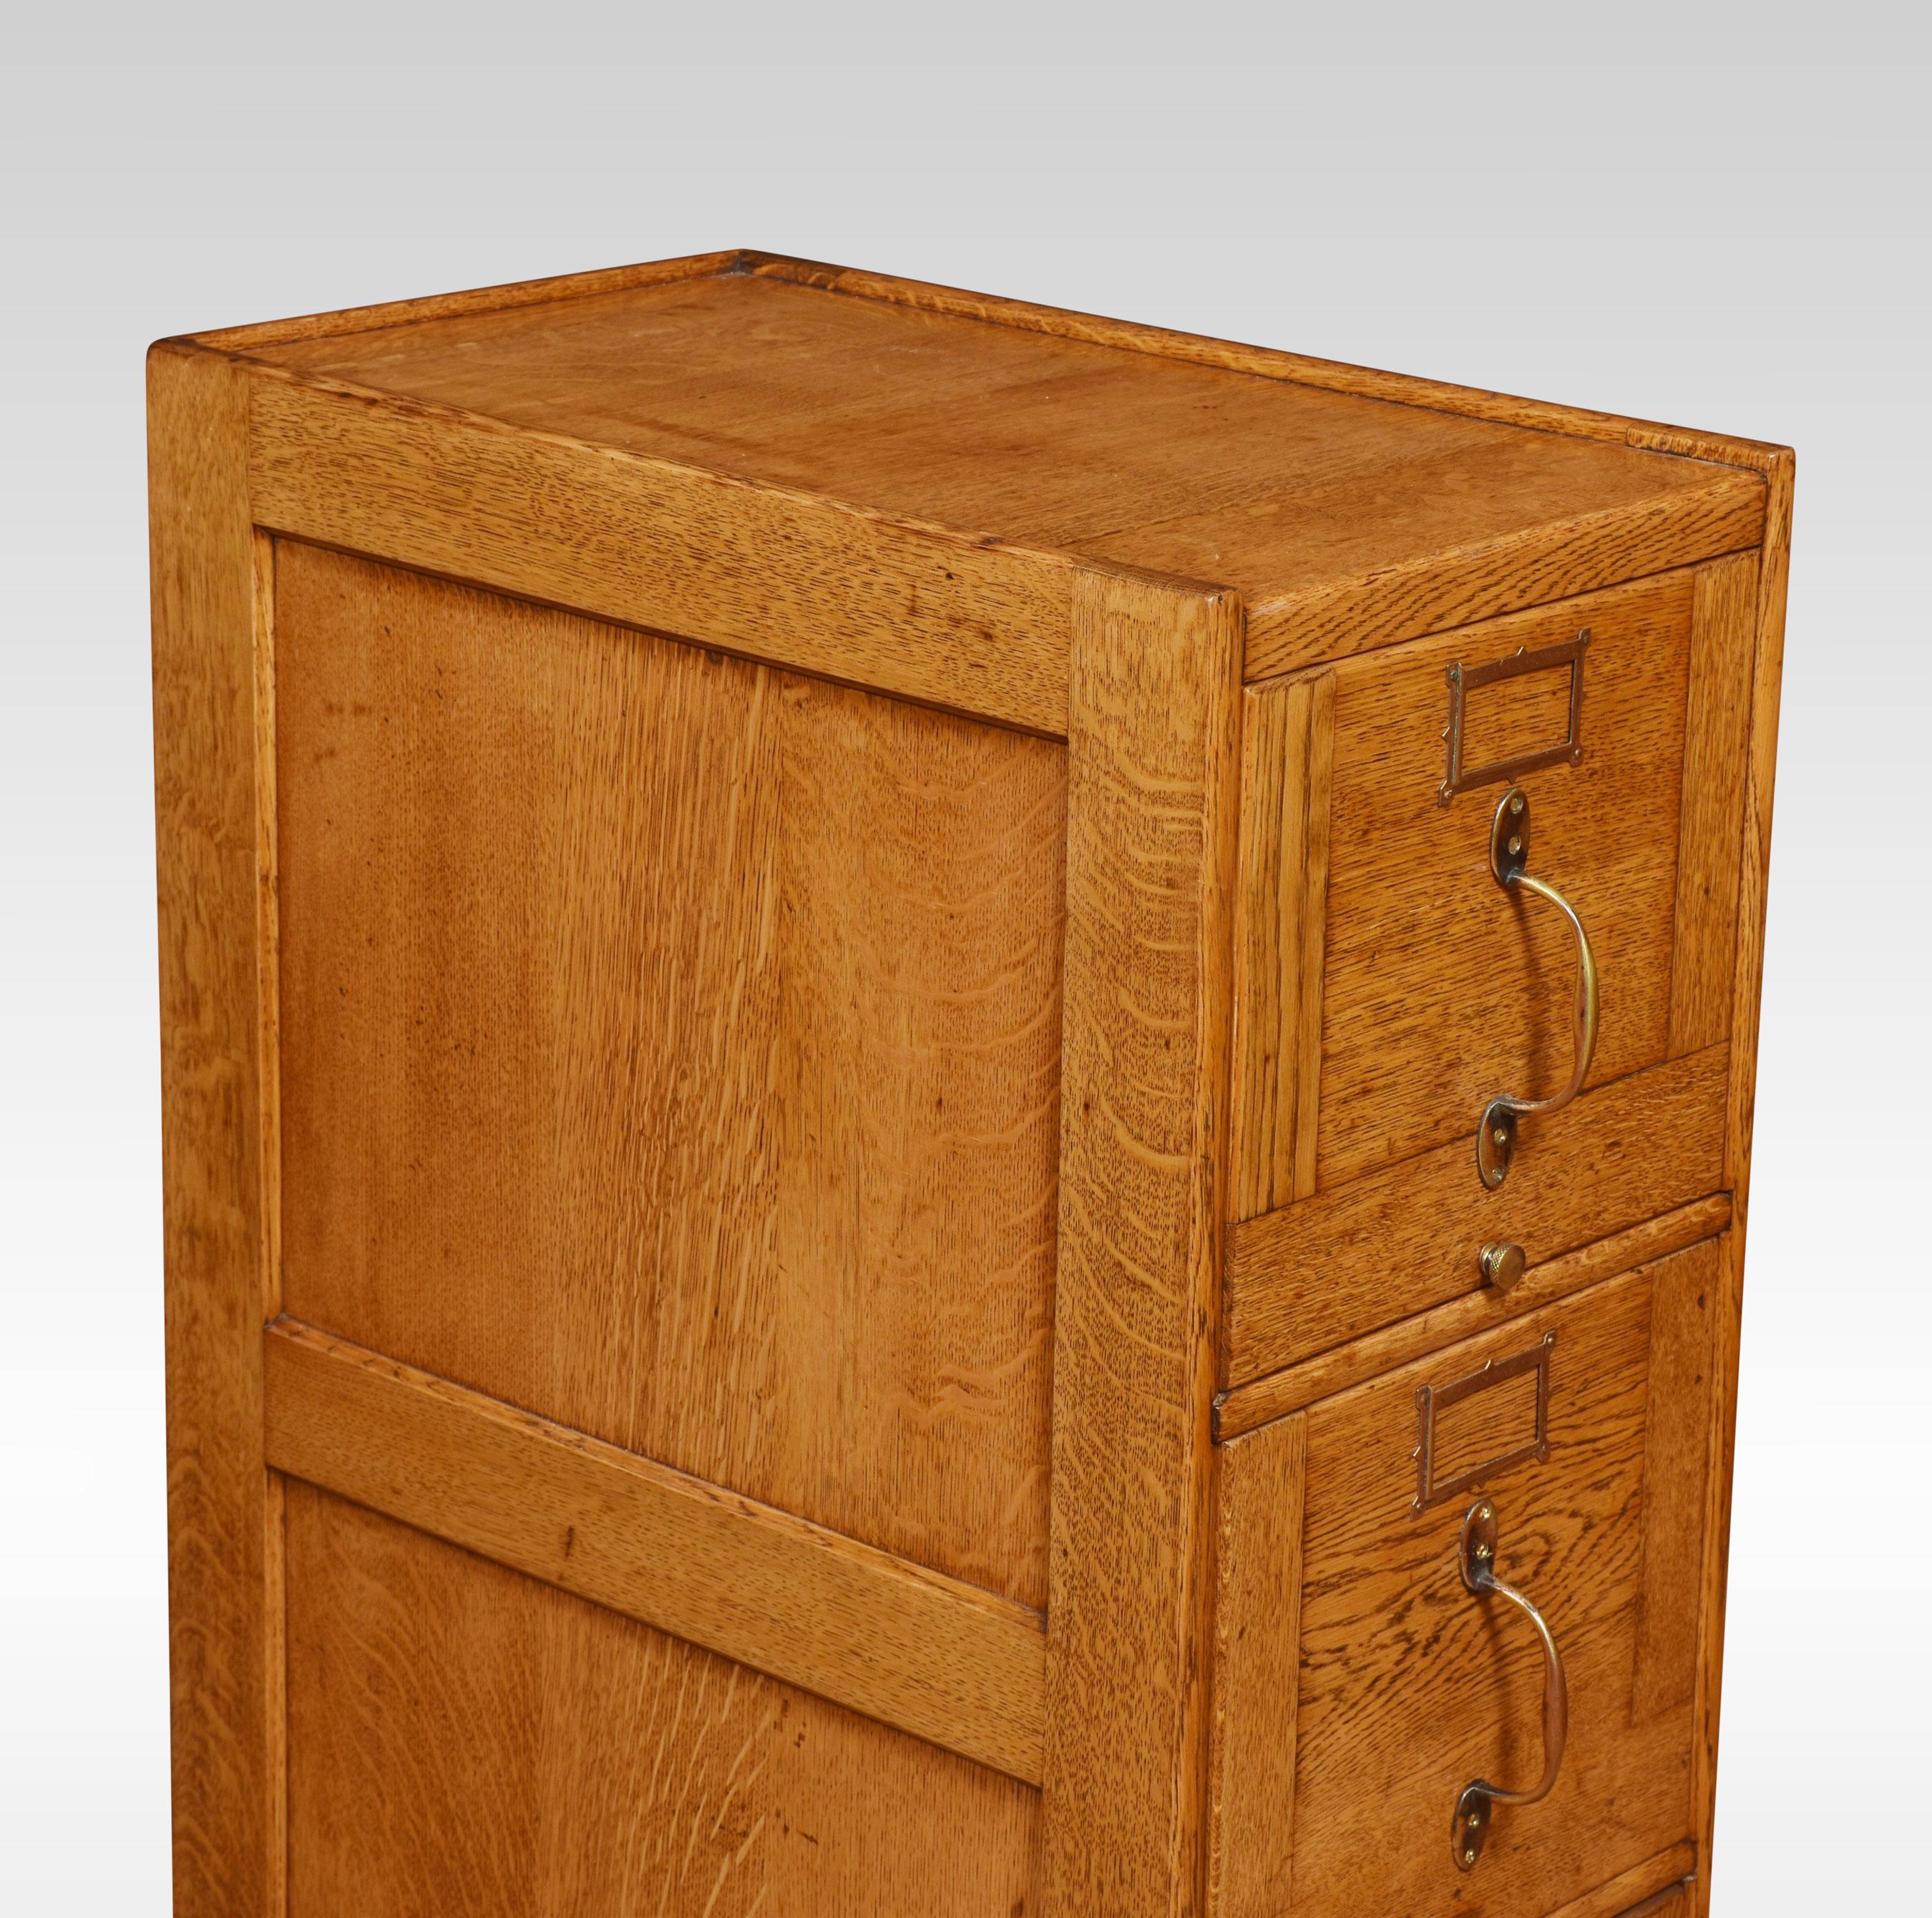 Oak filing cabinet, having a rectangular top, above three larger drawers, all drawers run freely and have nameplates. All raised up on plinth base.
Dimensions
Height 40 inches
Width 14.5 inches
Depth 24 inches.